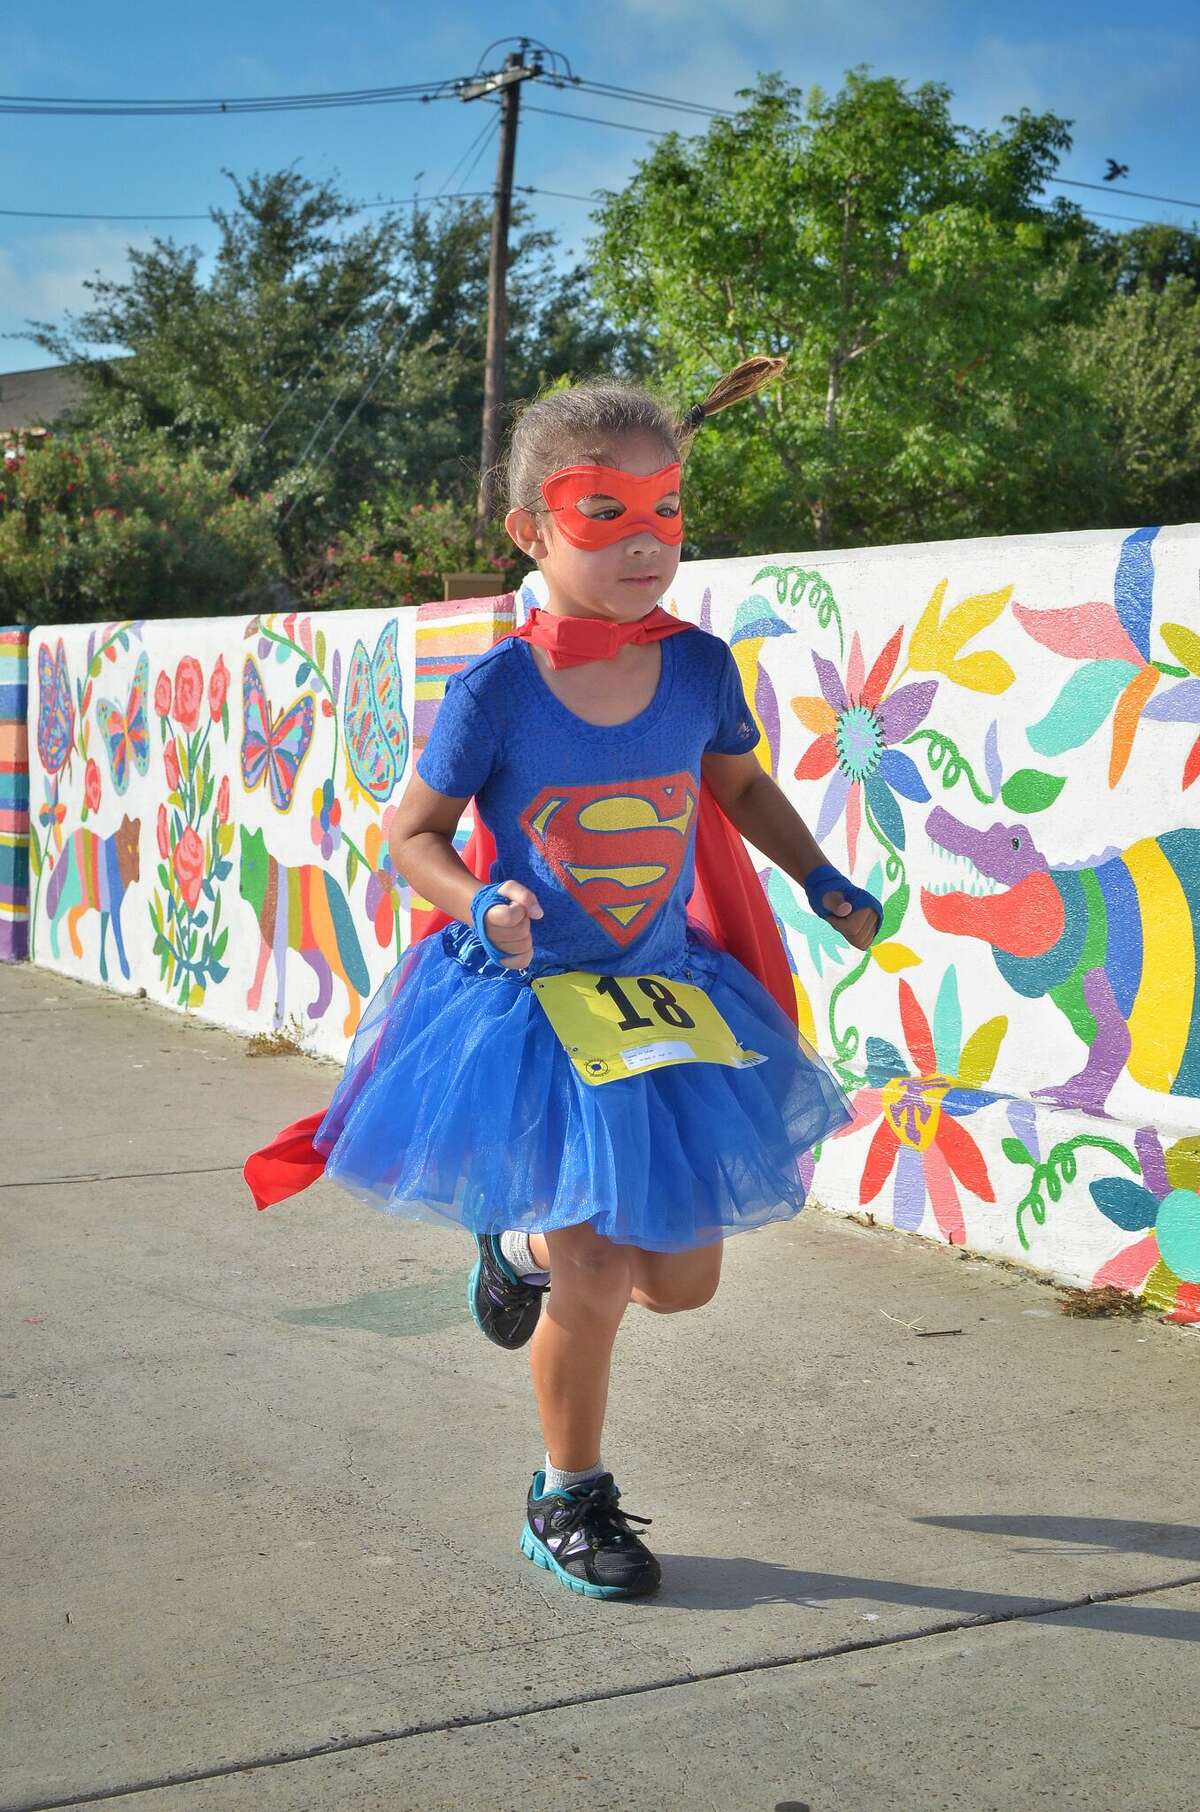 Runners participate in the CASA Superhero 5K and Family Fun Walk on June 17, 2017 at North Central Park.